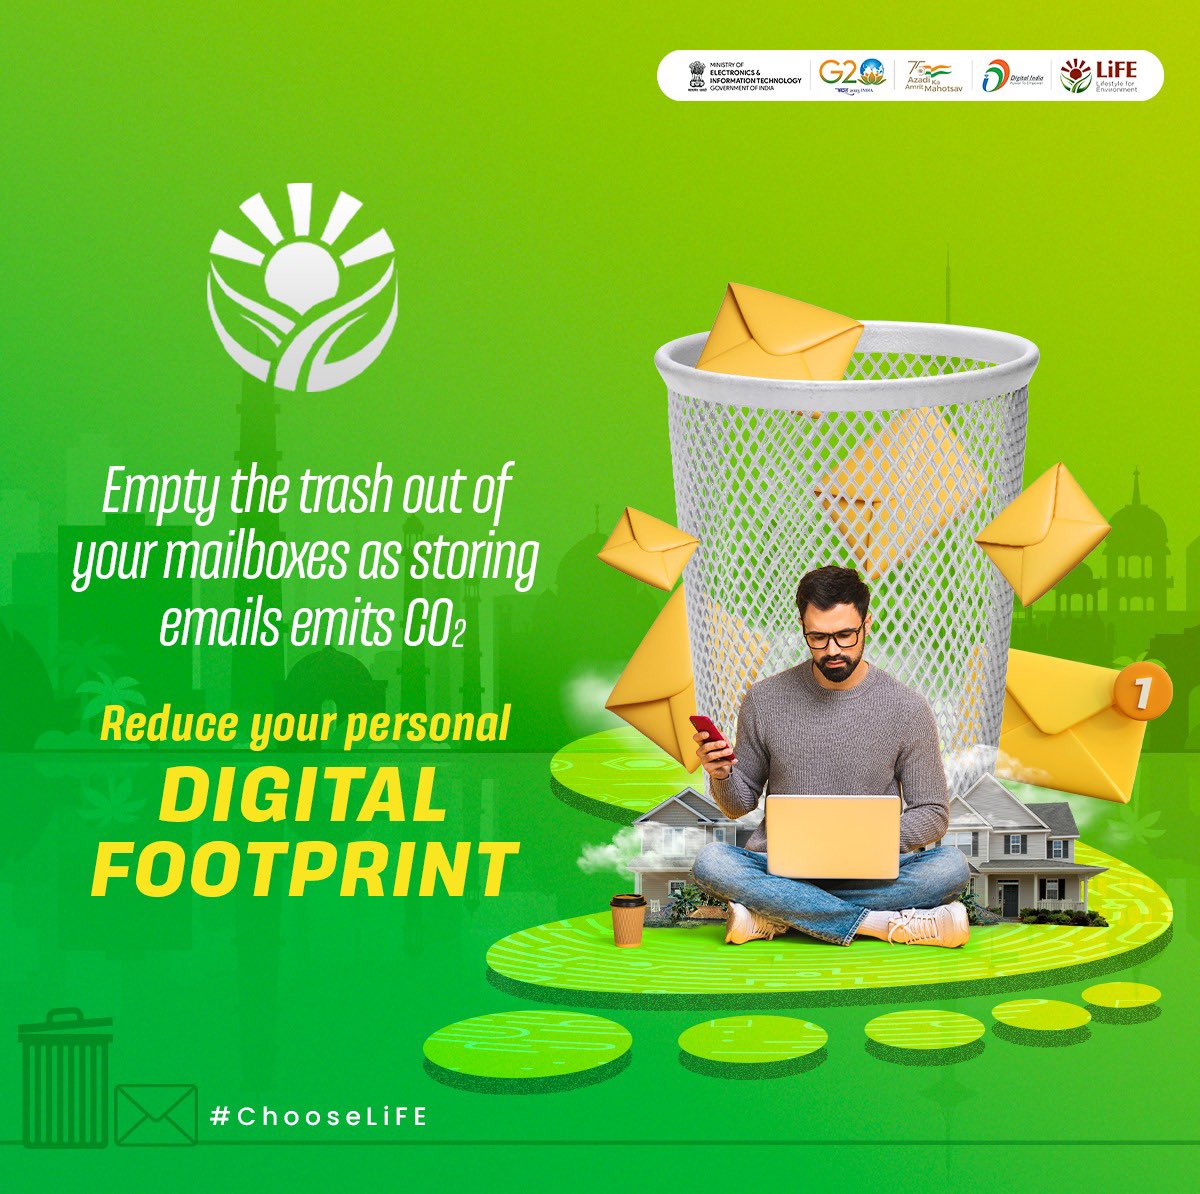 Get rid of unwanted emails and empty your trash and spam folders regularly. Reduce your #digitalfootprint and #ChooseLiFE. #MissionLiFE